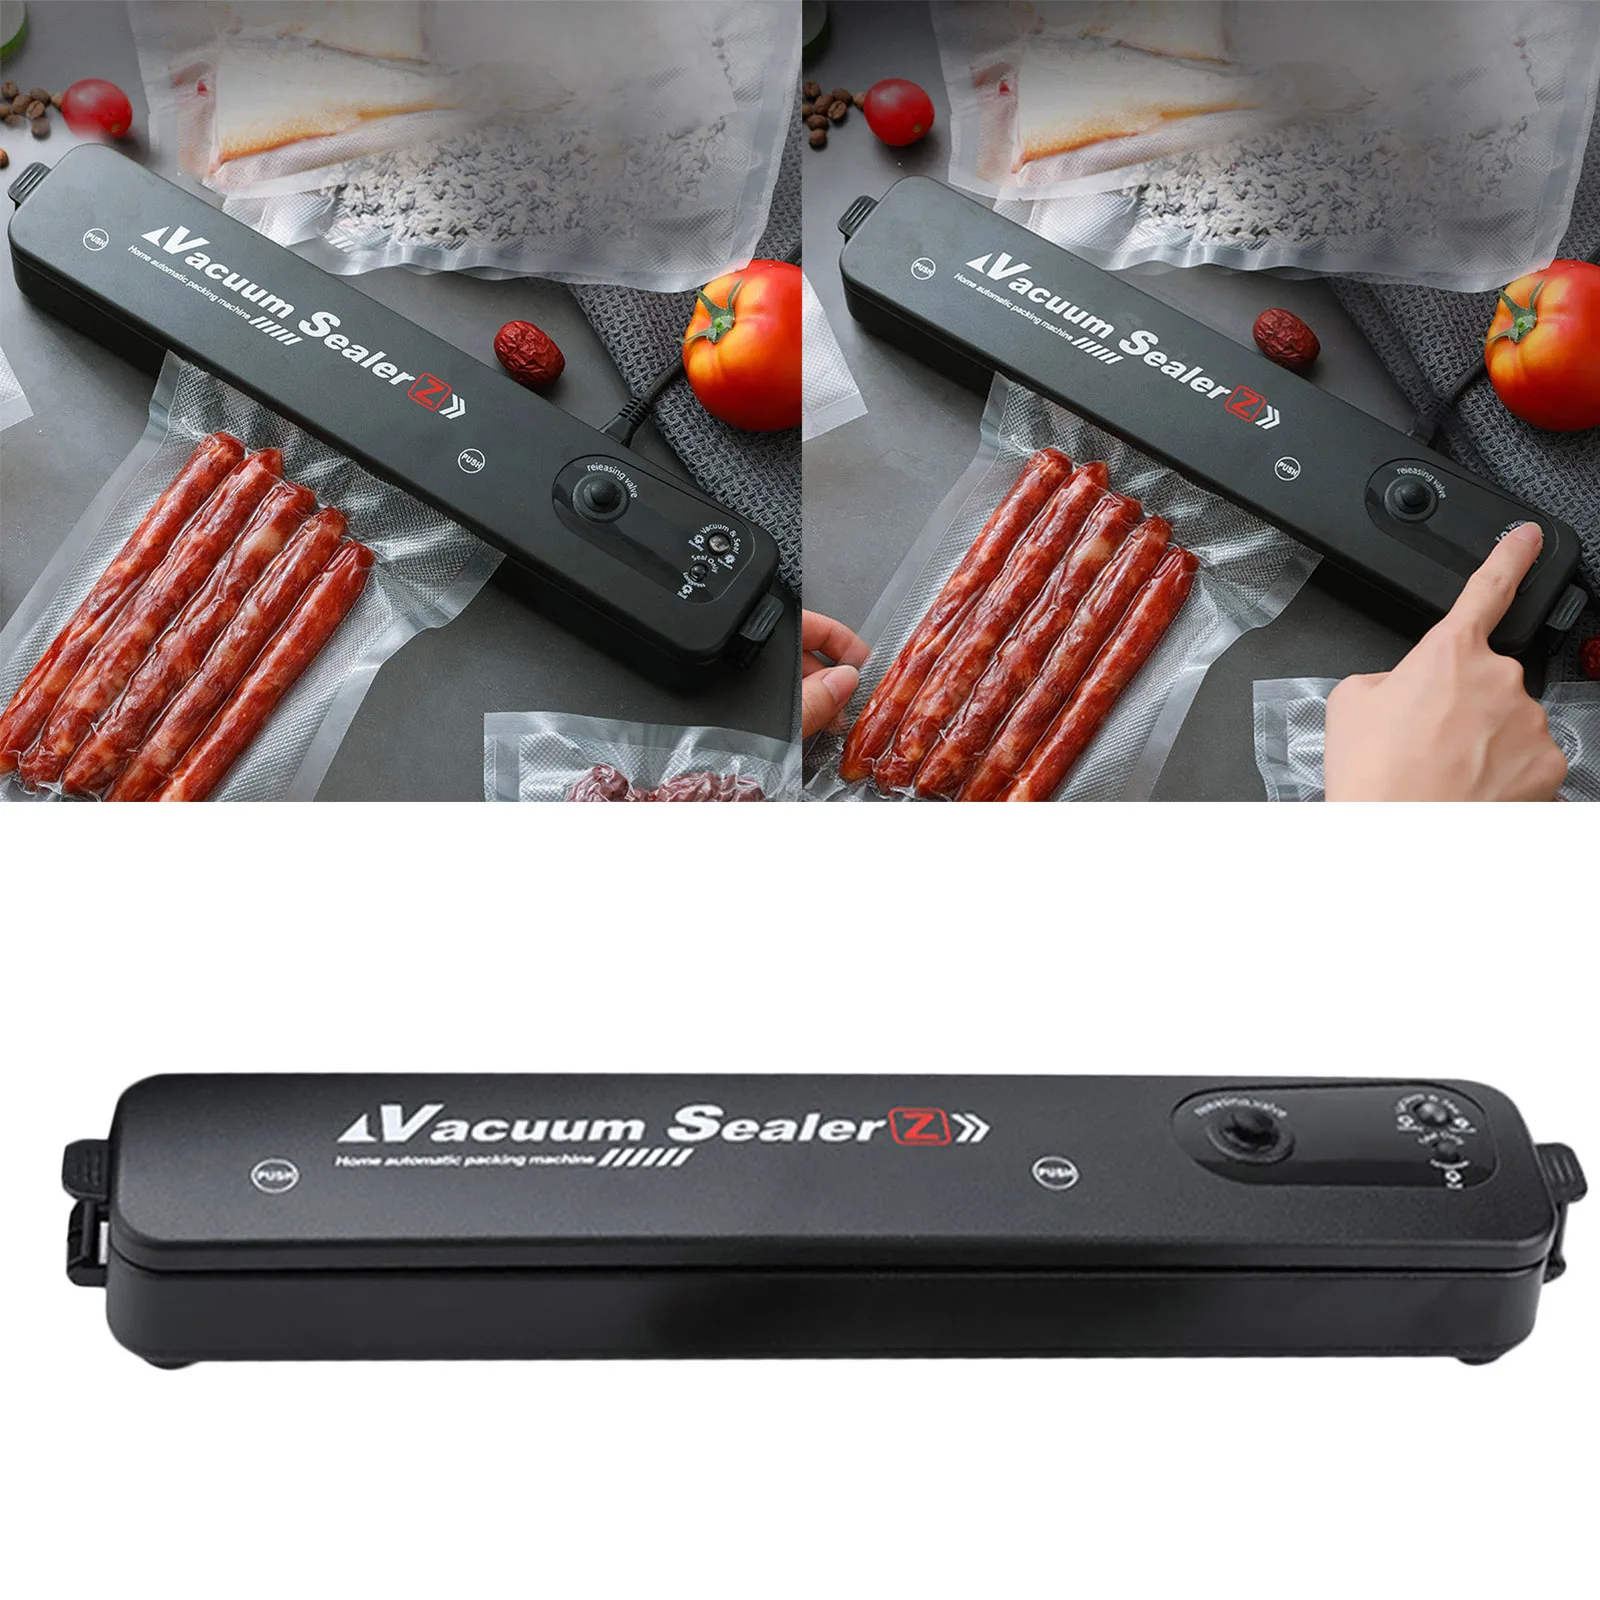 Food Vacuum Sealer Packaging Machine including 10Pcs bag Vaccum Packer can be use for A Meal Food Saver, Fresh-Keeping